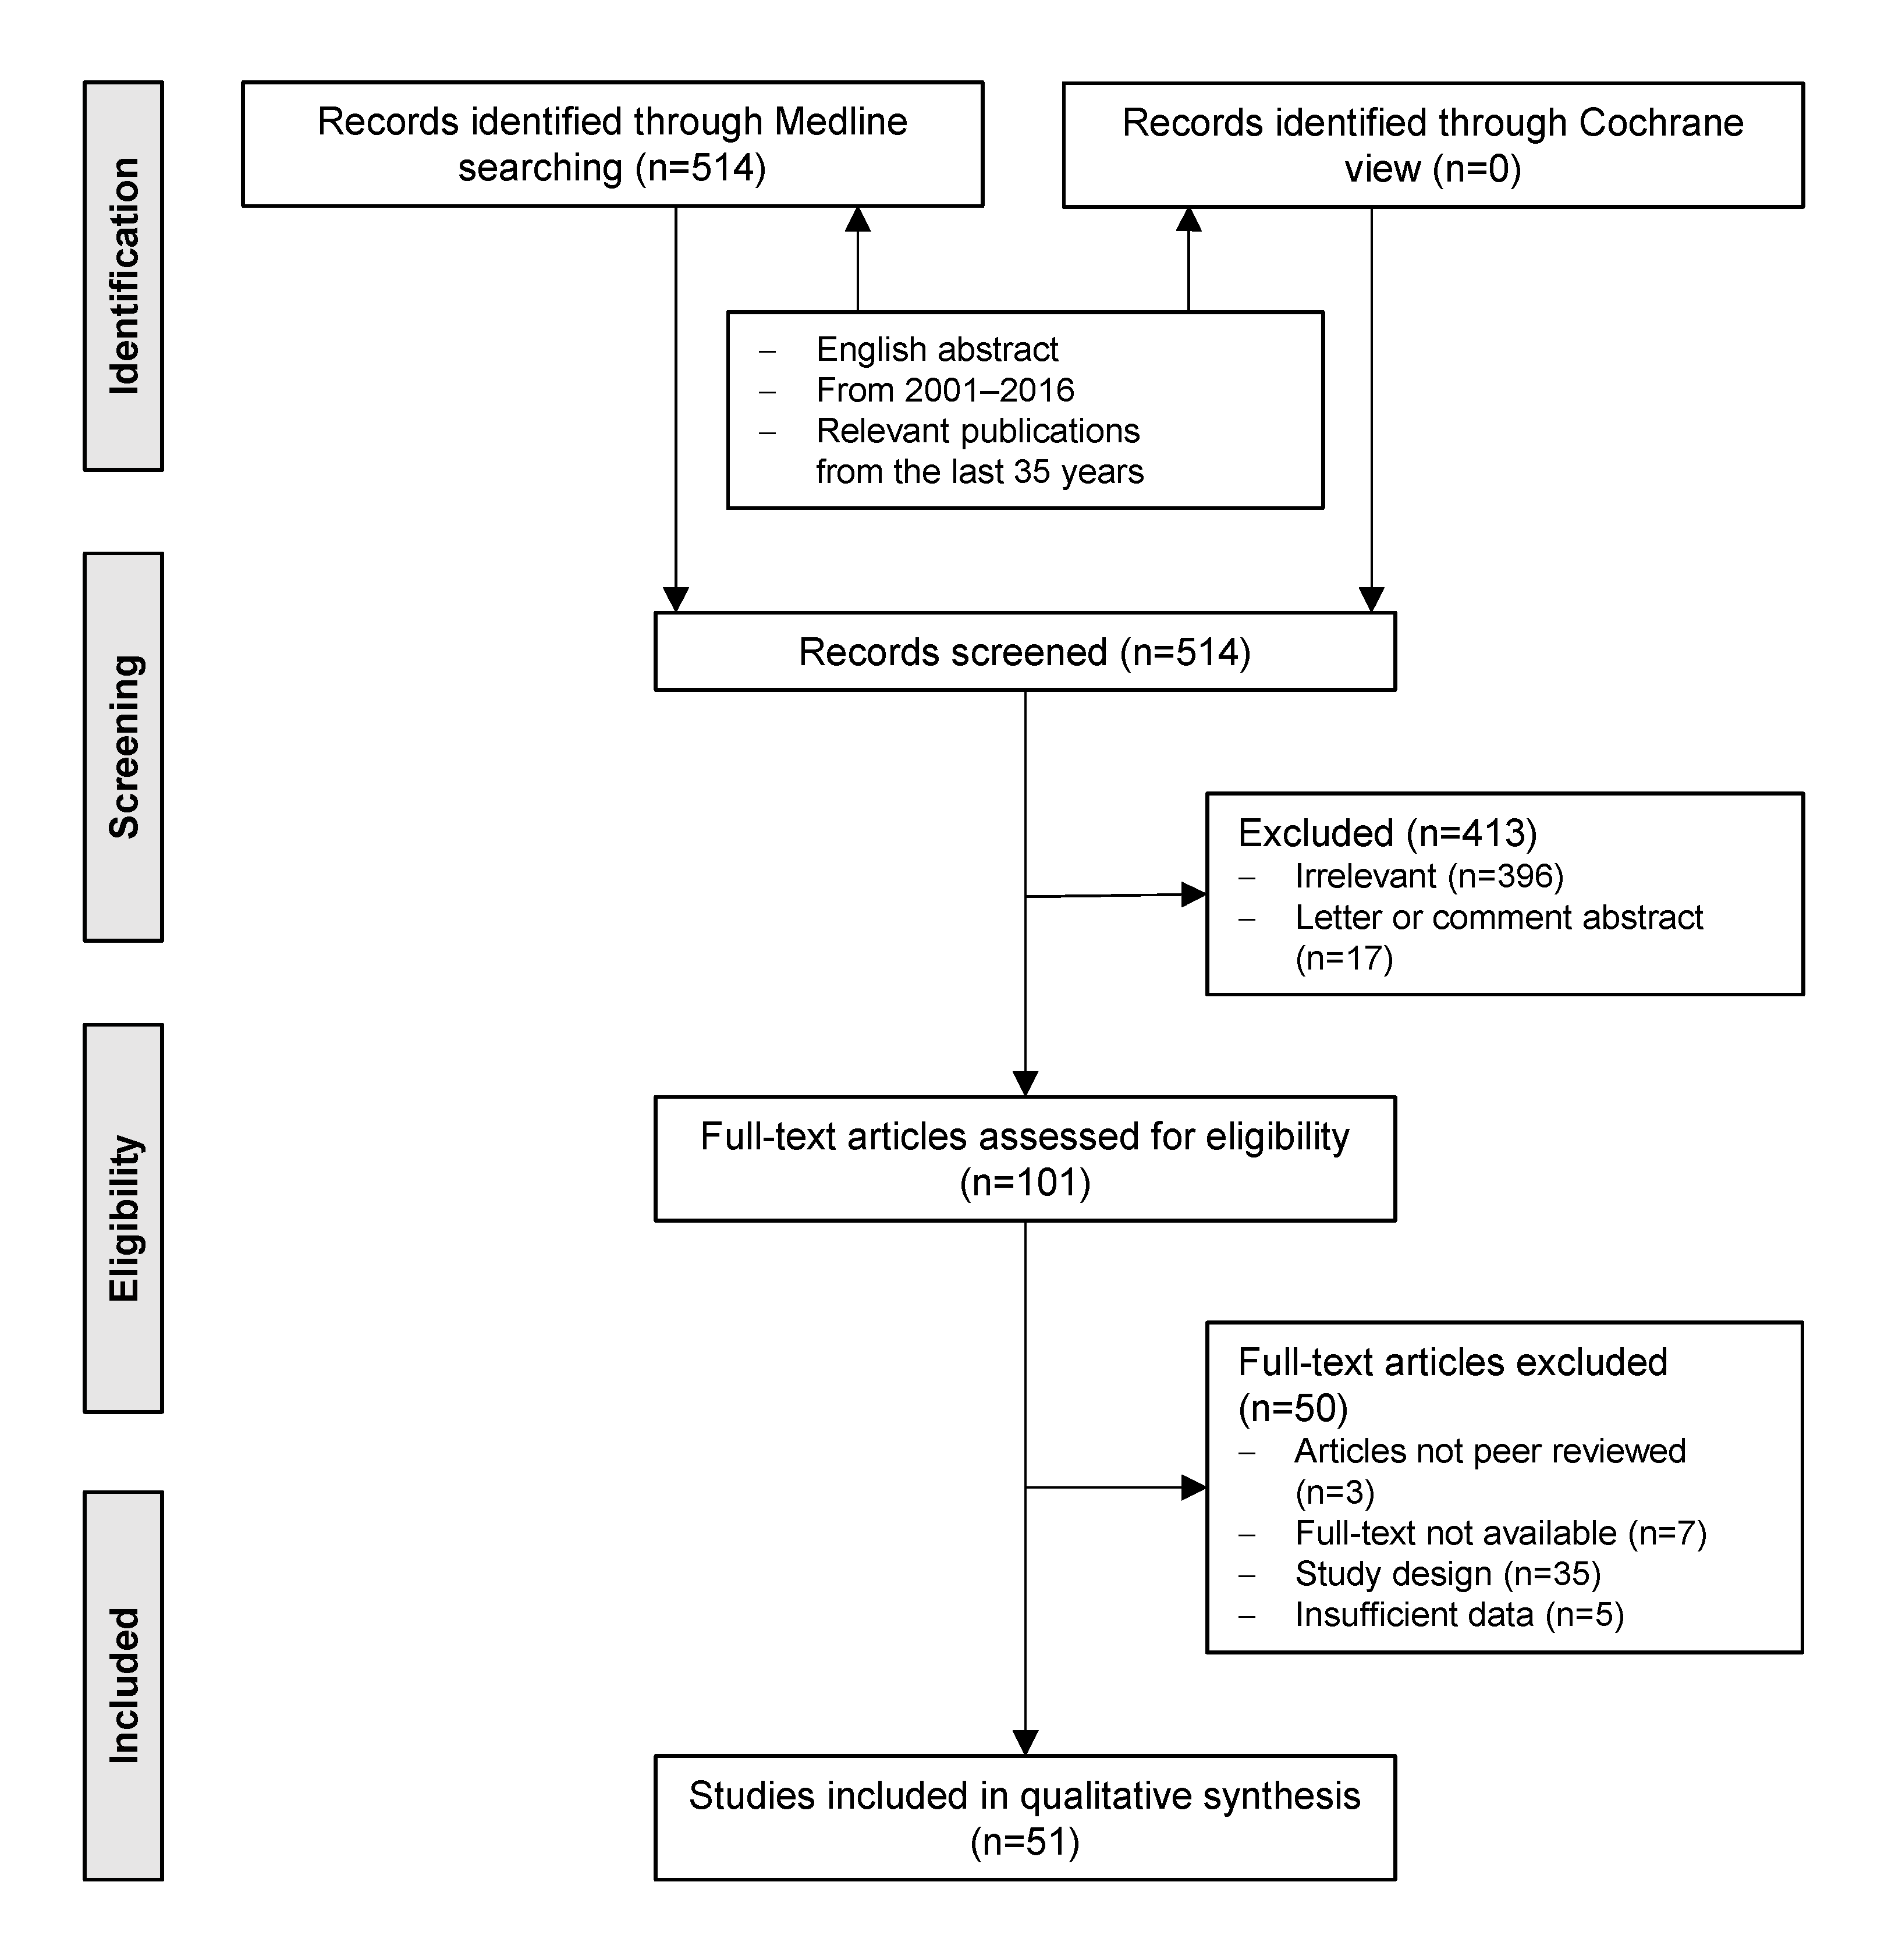 Figure 1: PRISMA flow diagram of the systematic review [12]